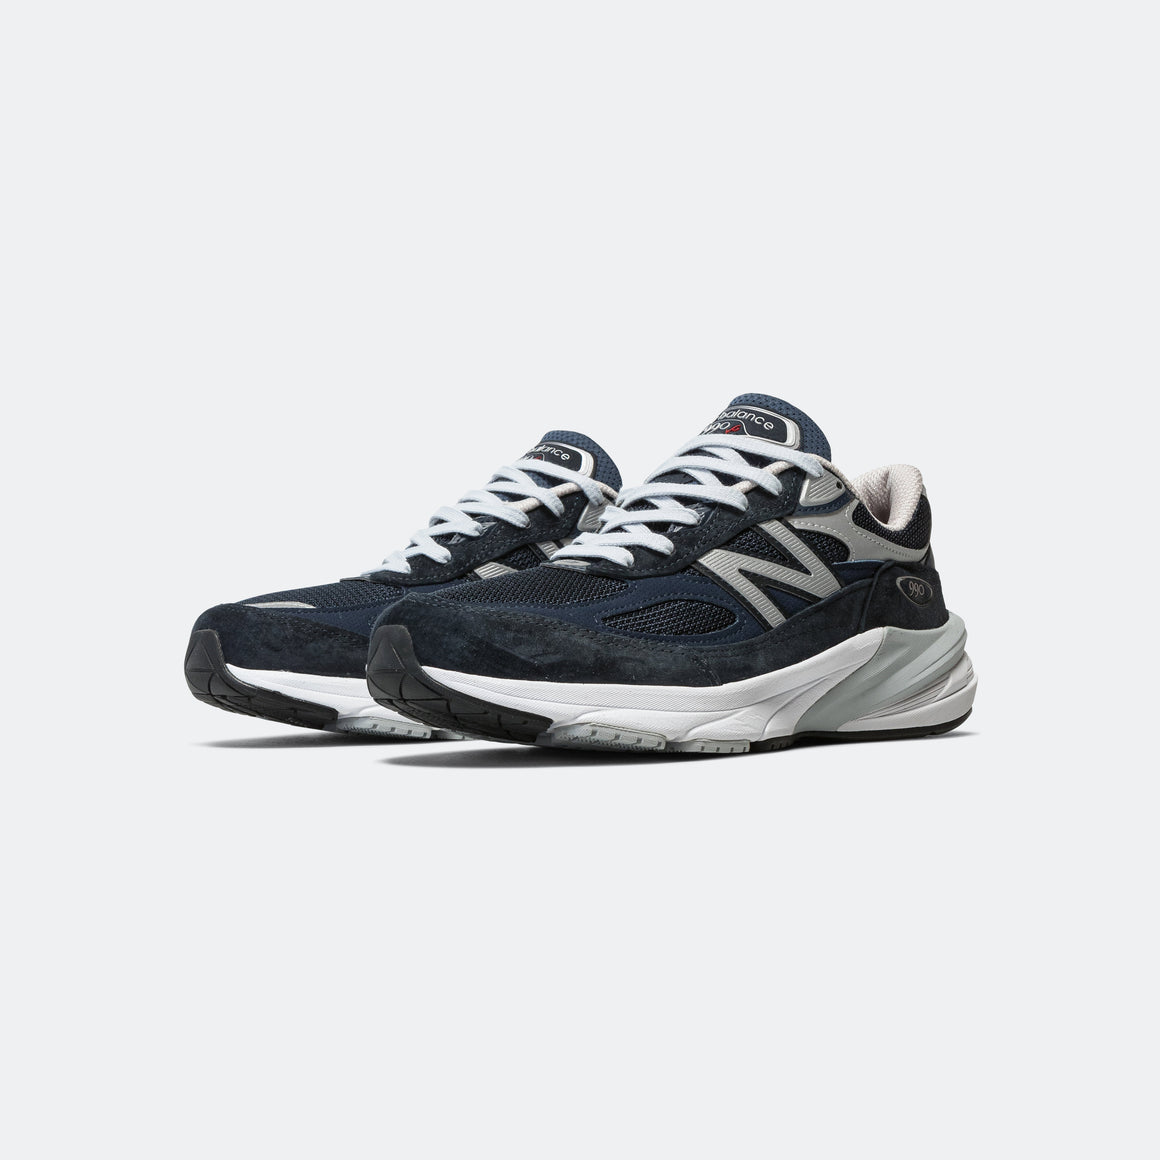 New Balance - M990NV6 - UP THERE